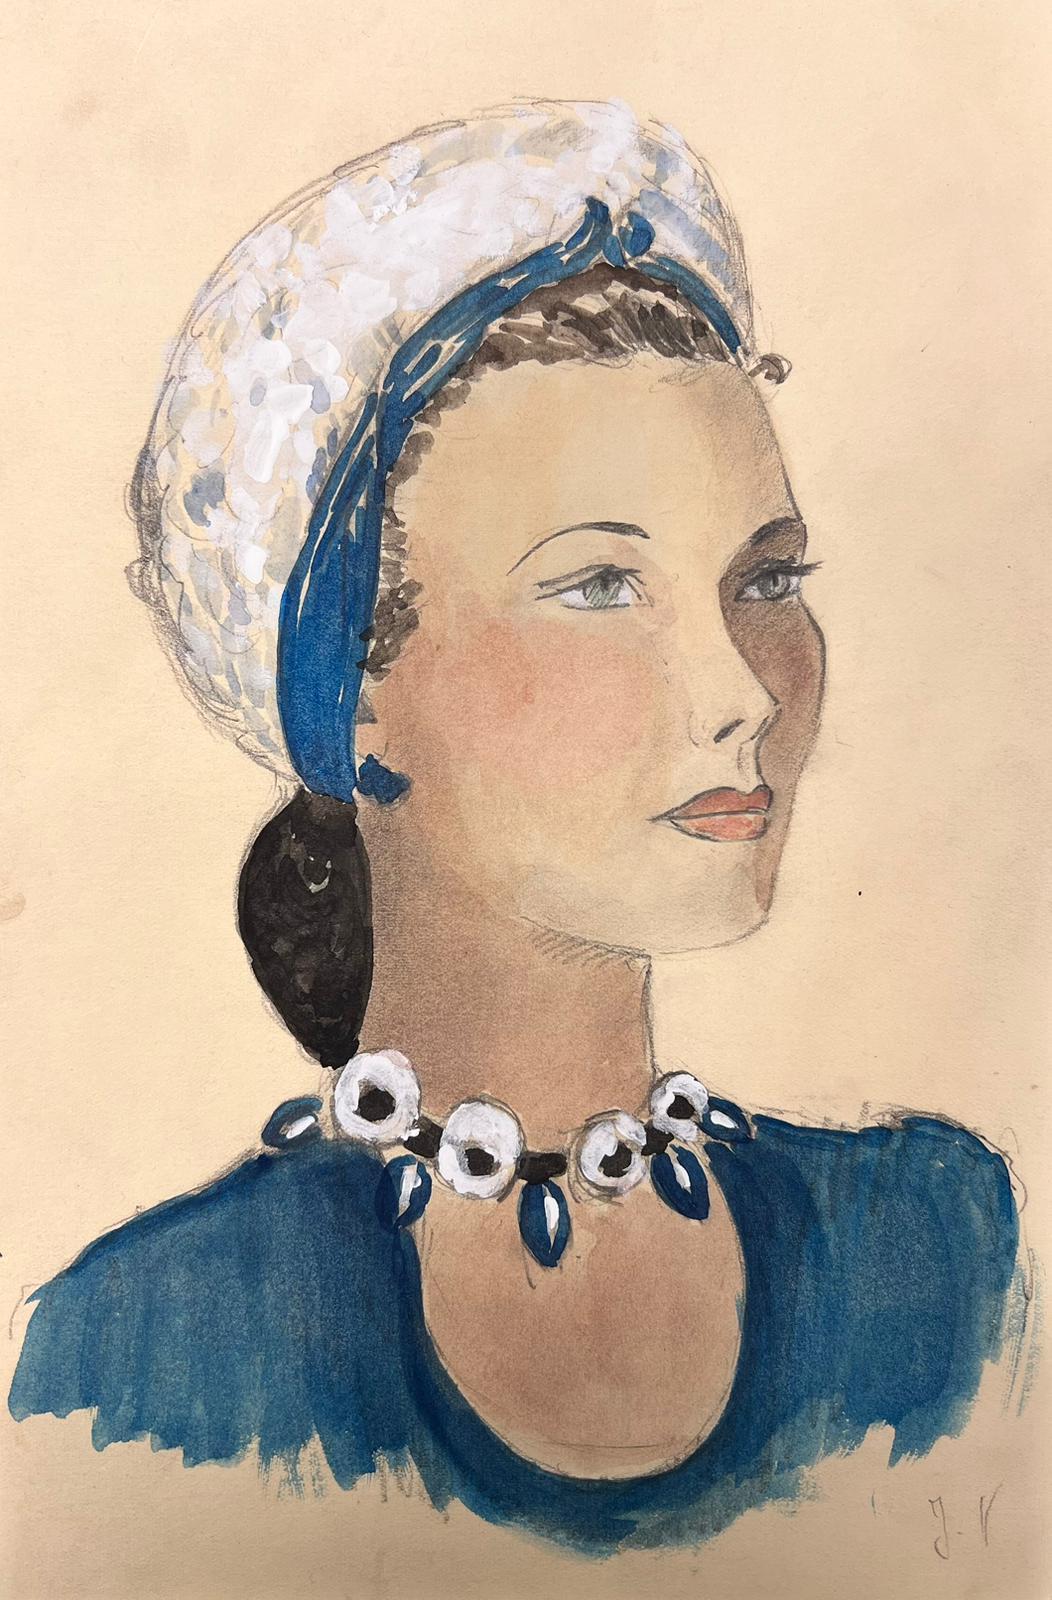 Lady In Blue
by Josine Vignon (French 1922-2022) 
ink/watercolour/pencil drawing on card, unframed
signed J.V
paper: 10 x 6.25 inches
very good condition 
provenance: from the artists estate, France

Josine Vignon (1922-2022) was a French artist